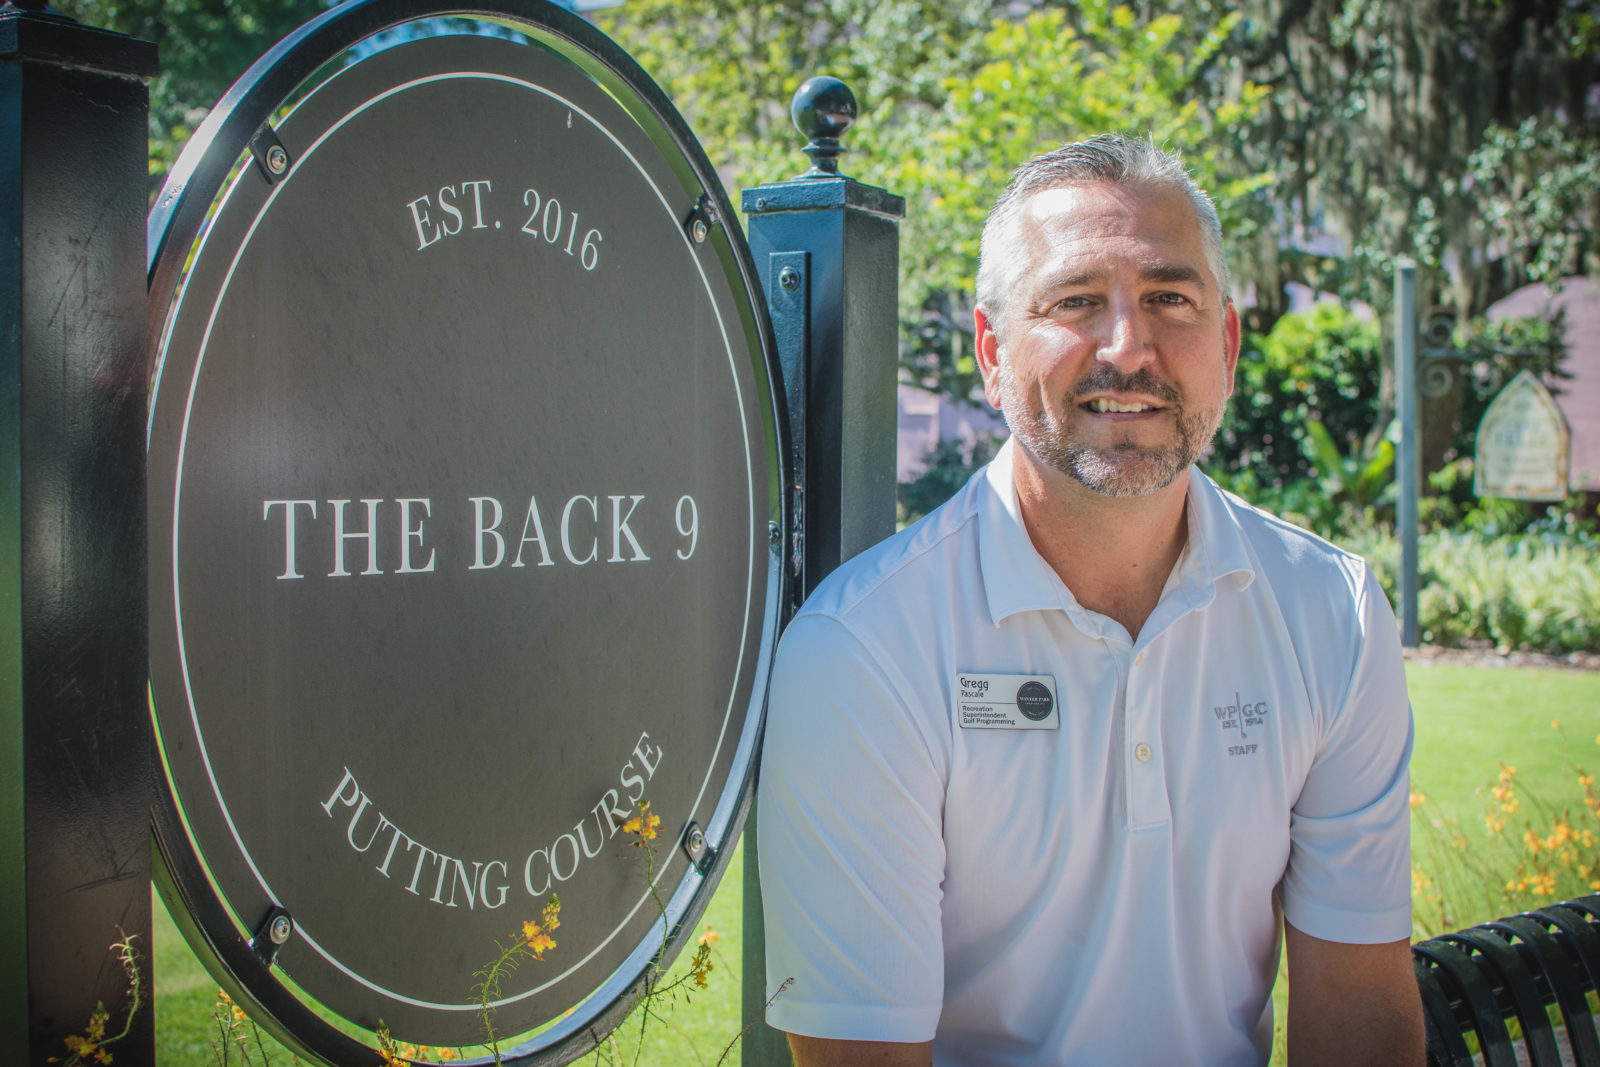 Gregg Pascale pictured at The Back 9 of the Winter Park Golf Course.